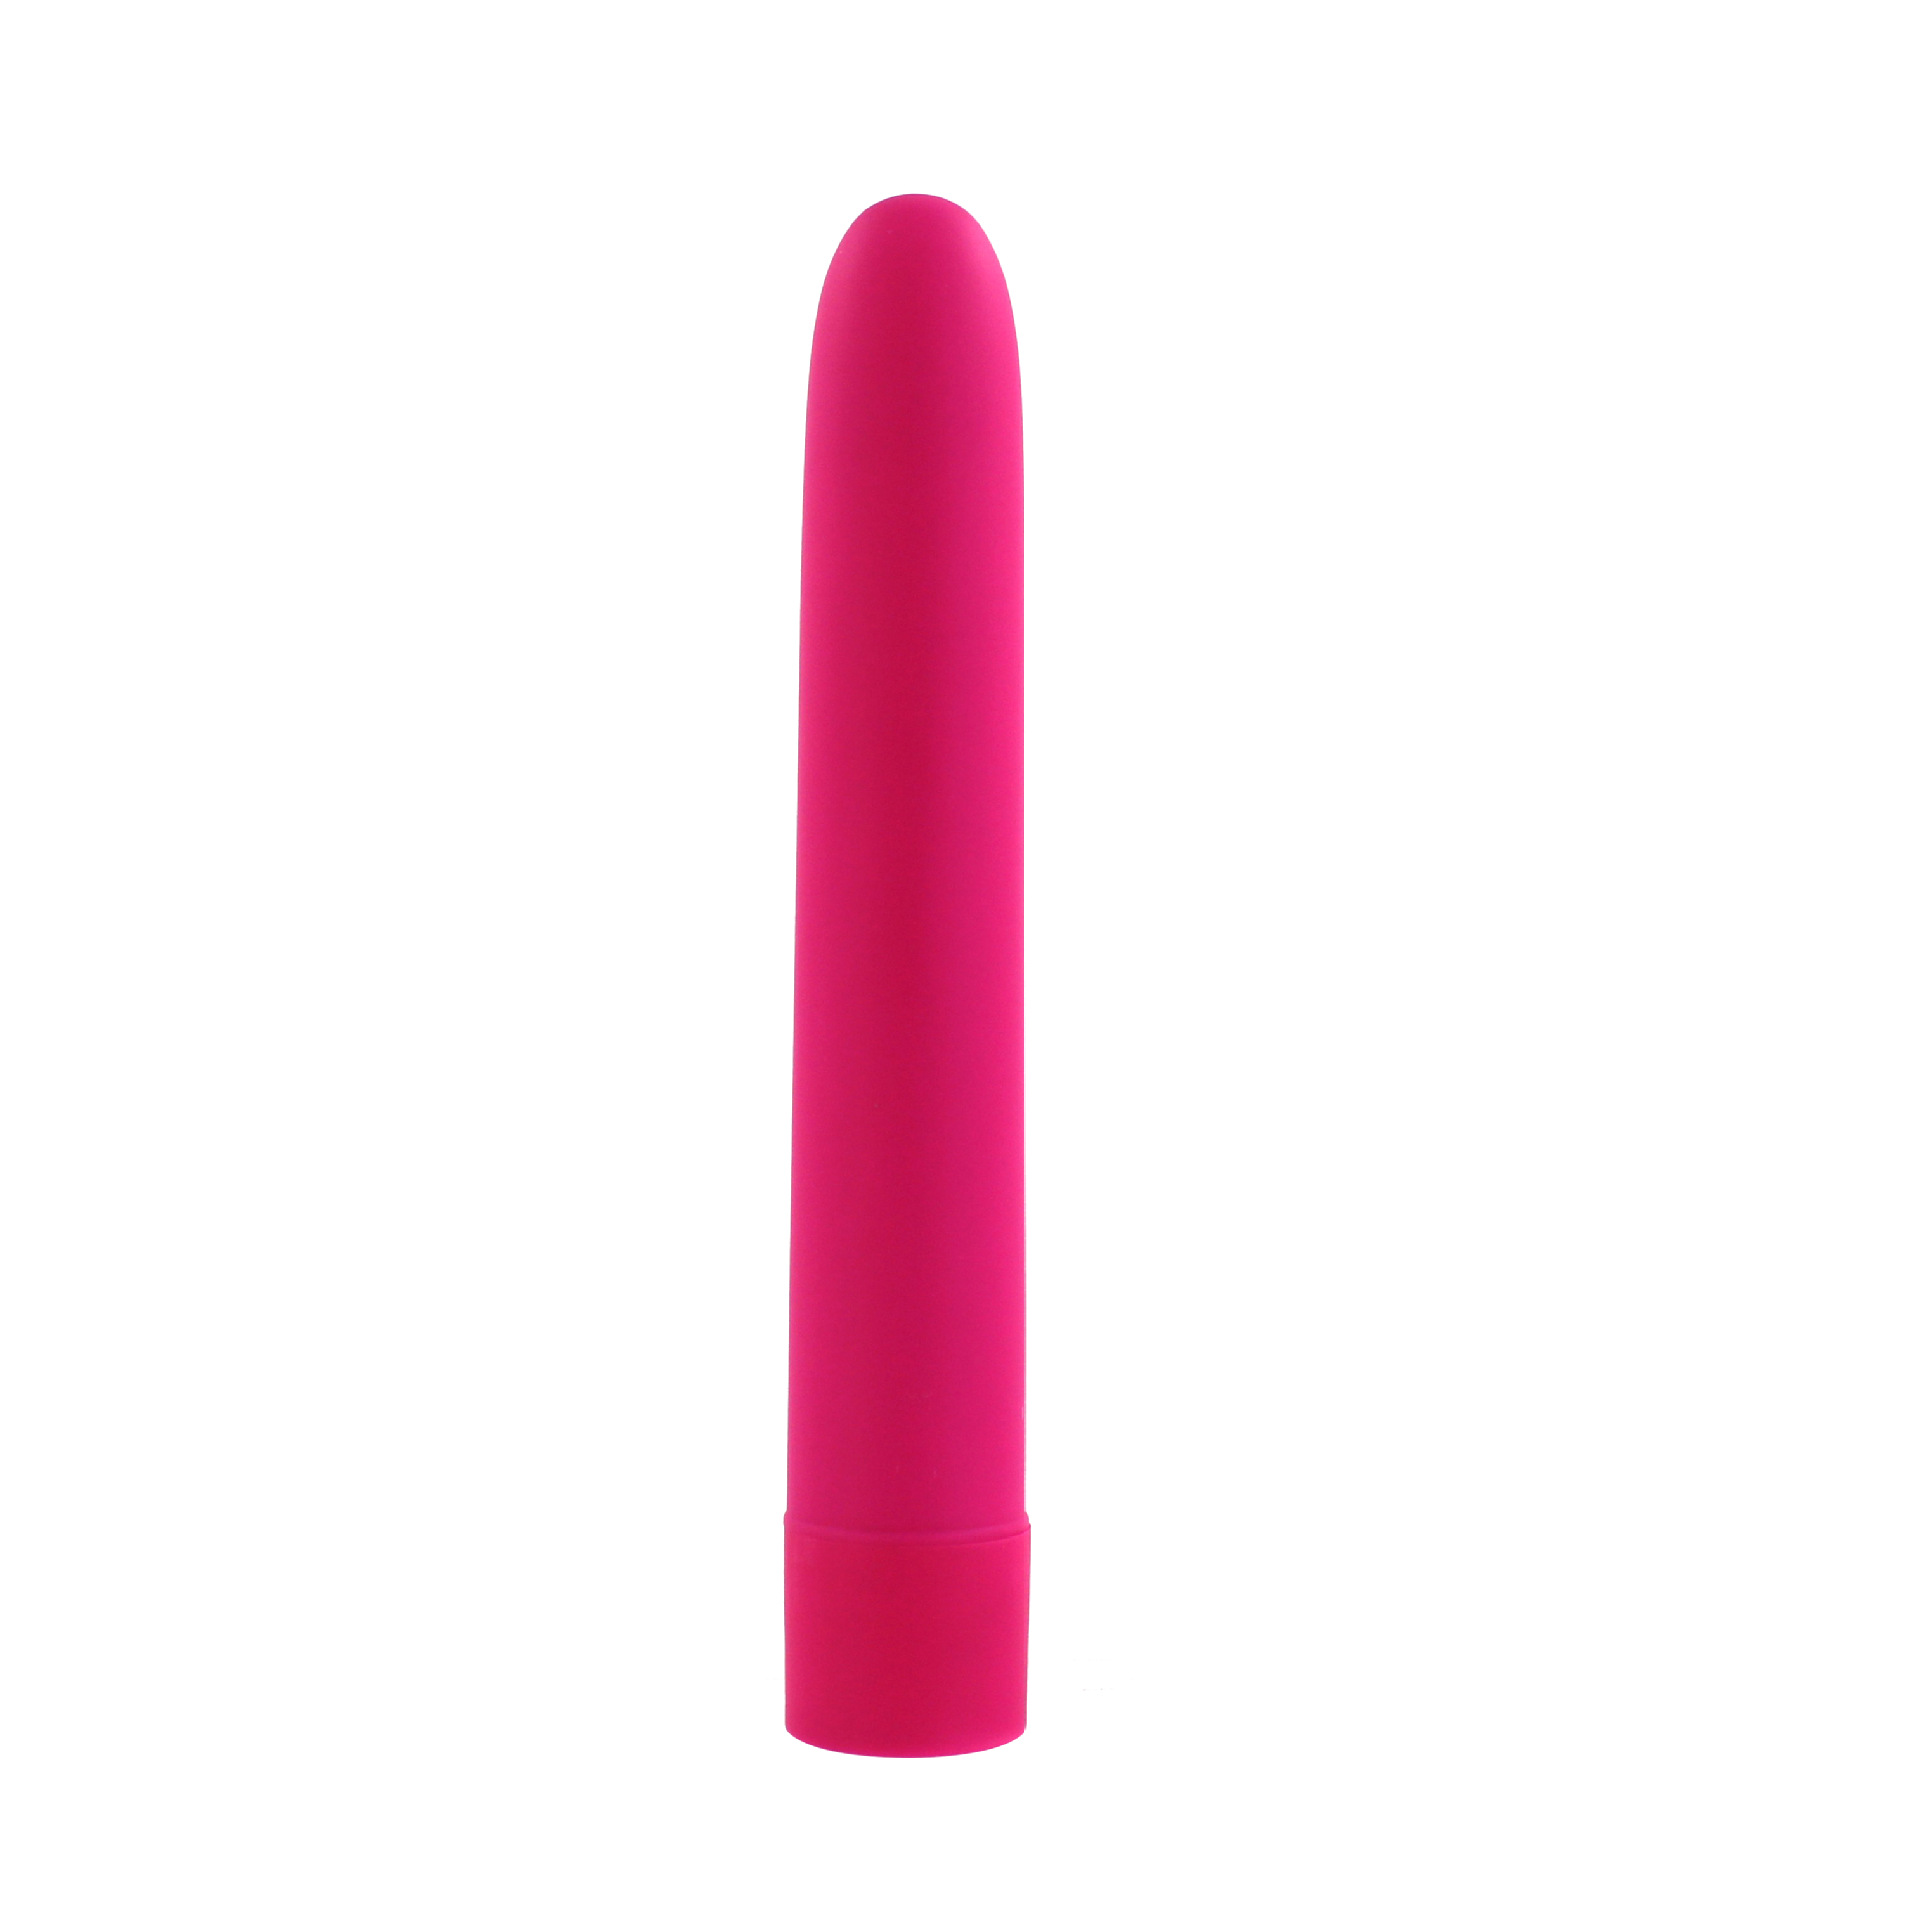 Pure Love 7 Classic Vibrator - 10 Functions Water-Resistant